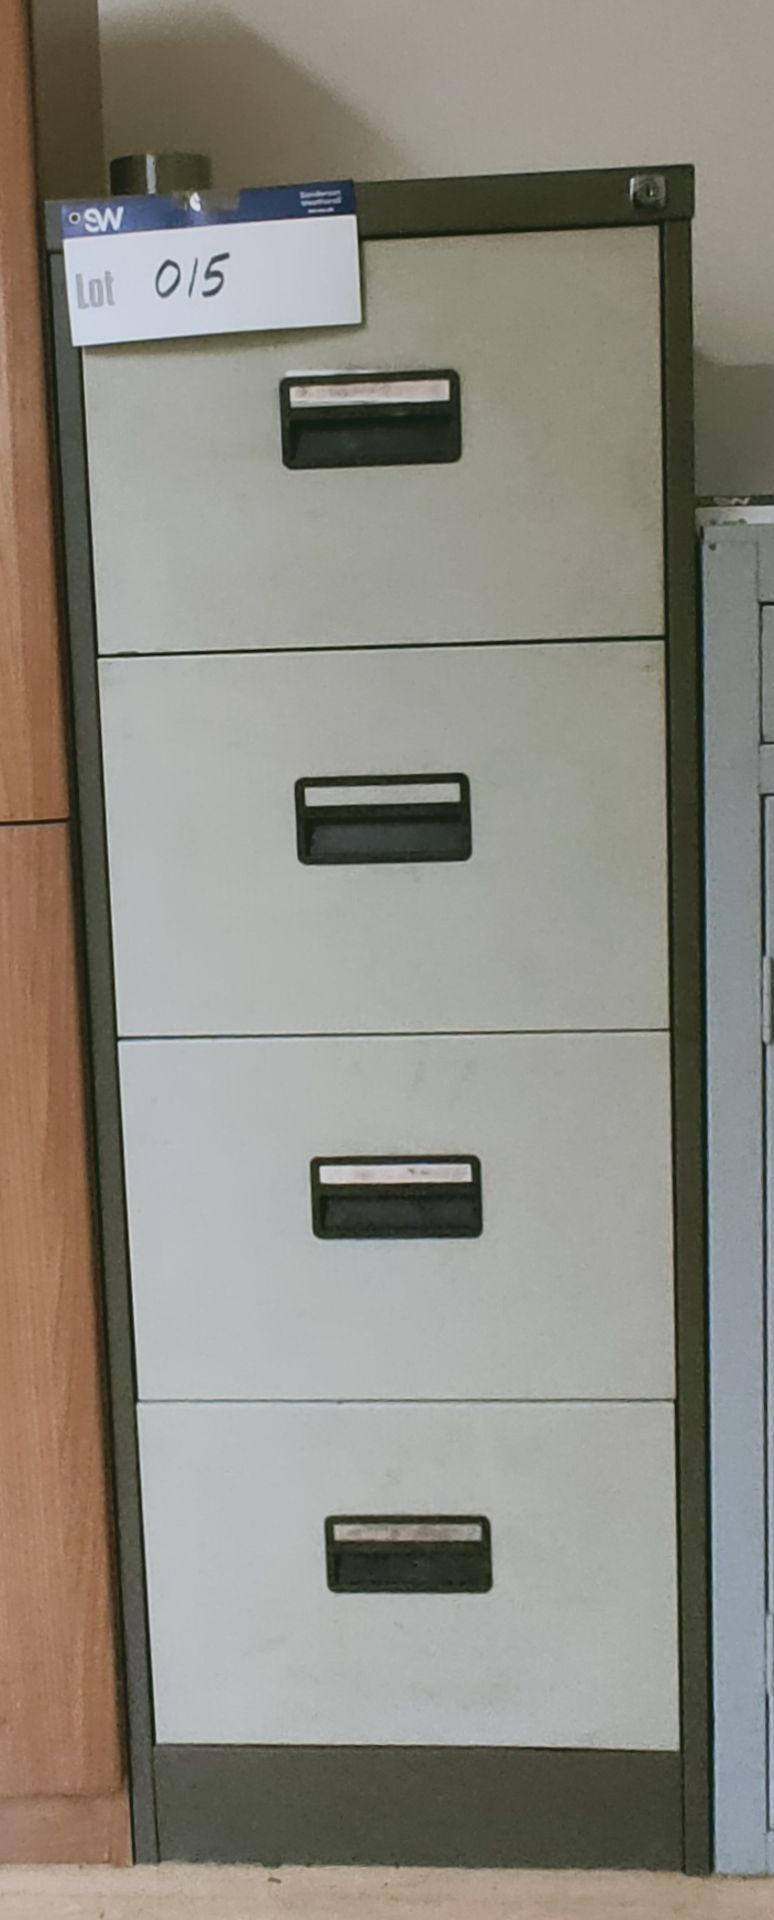 Four Drawer Filing Cabinet, approx. 132cm x 62cm x 46cm, loading free of charge - yes (vendors